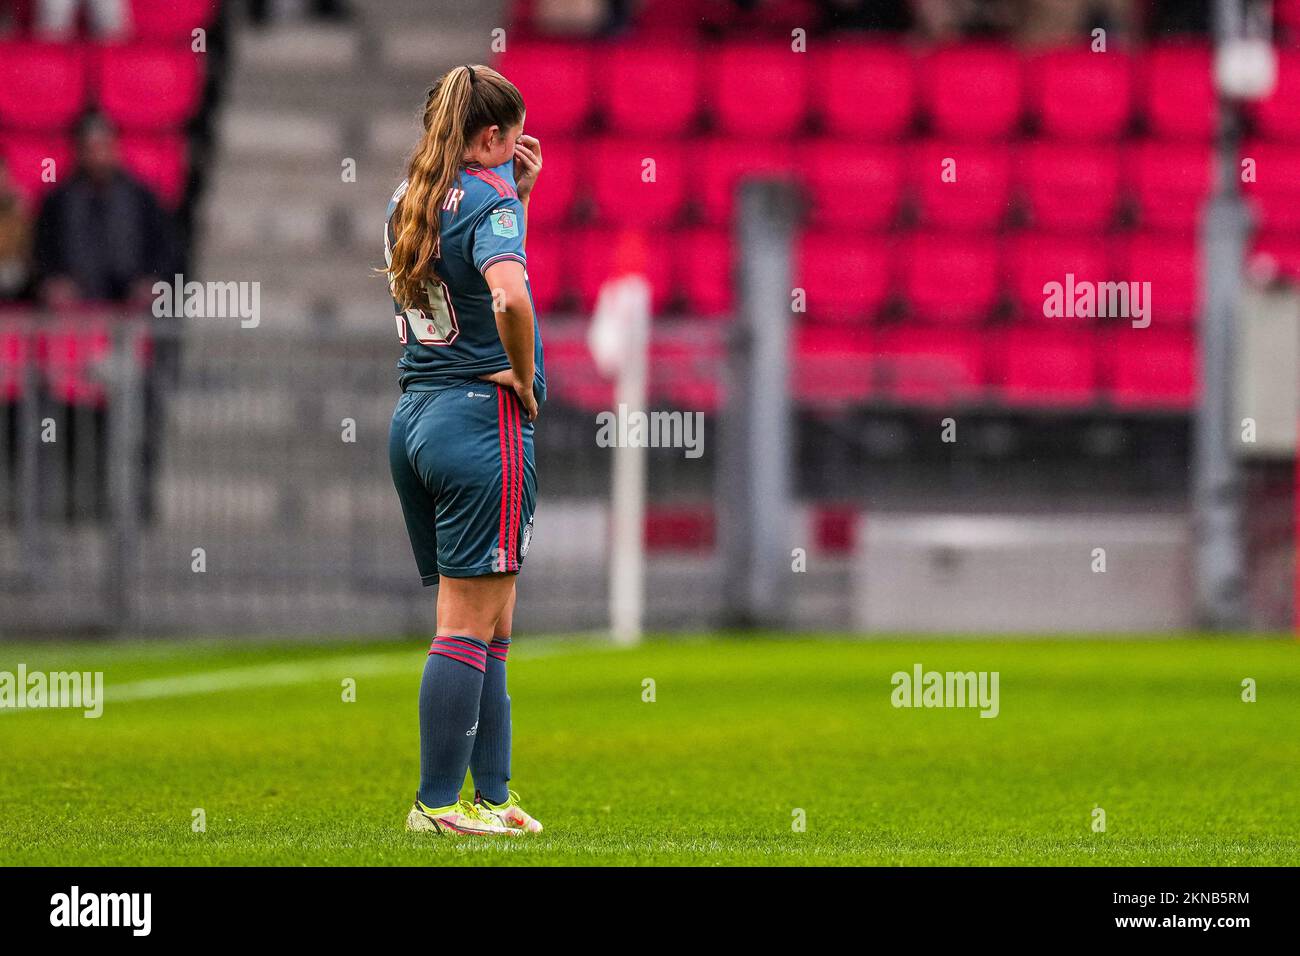 Eindhoven - Romee van de Lavoir of Feyenoord V1 reacts to the 1-0 during the match between PSV V1 v Feyenoord V1 at Philips Stadion on 27 November 2022 in Eindhoven, Netherlands. (Box to Box Pictures/Yannick Verhoeven) Stock Photo